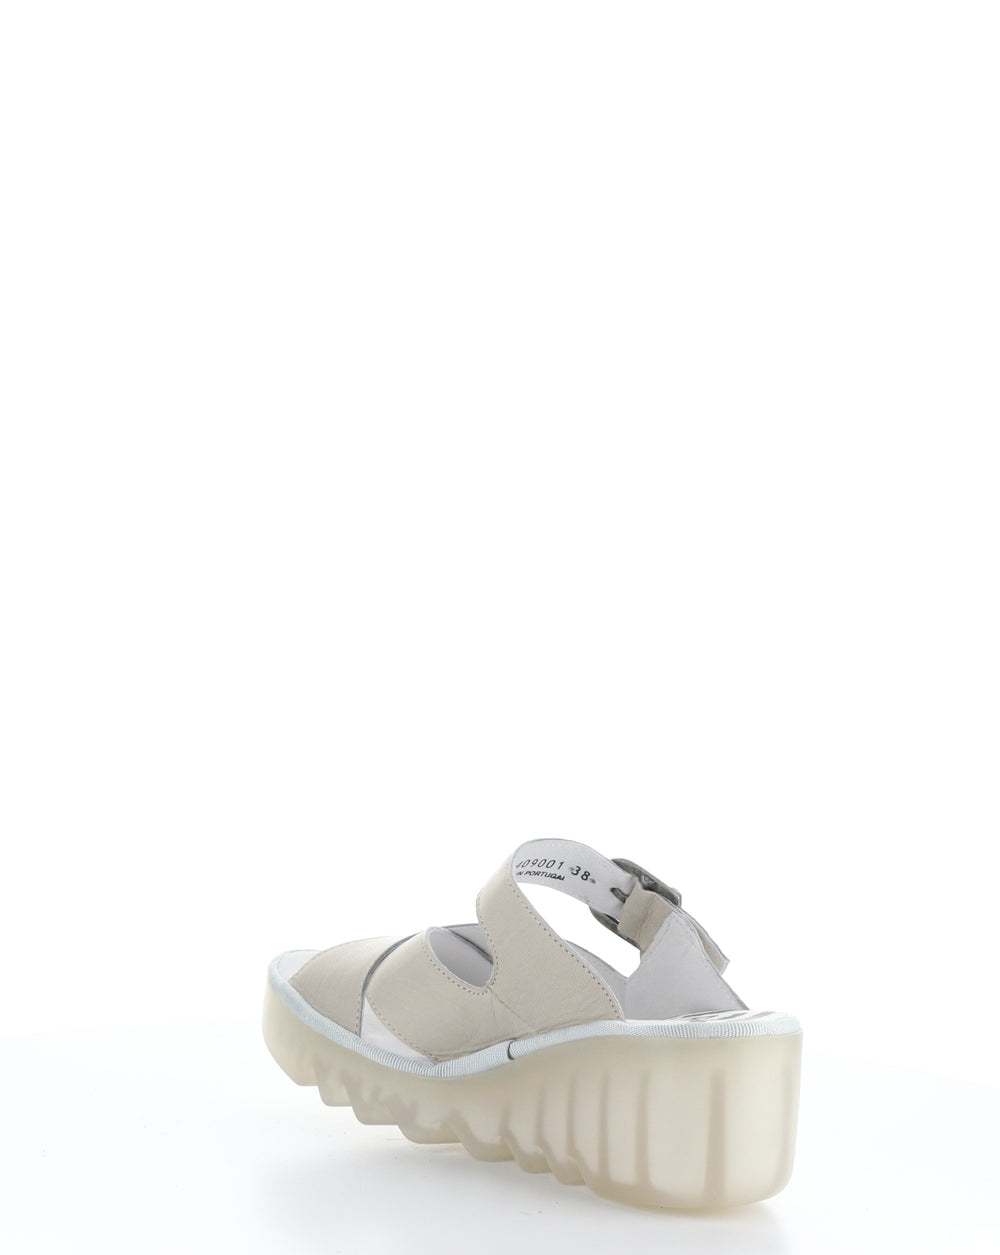 BOCY409FLY 001 CLOUD Slip-on Sandals